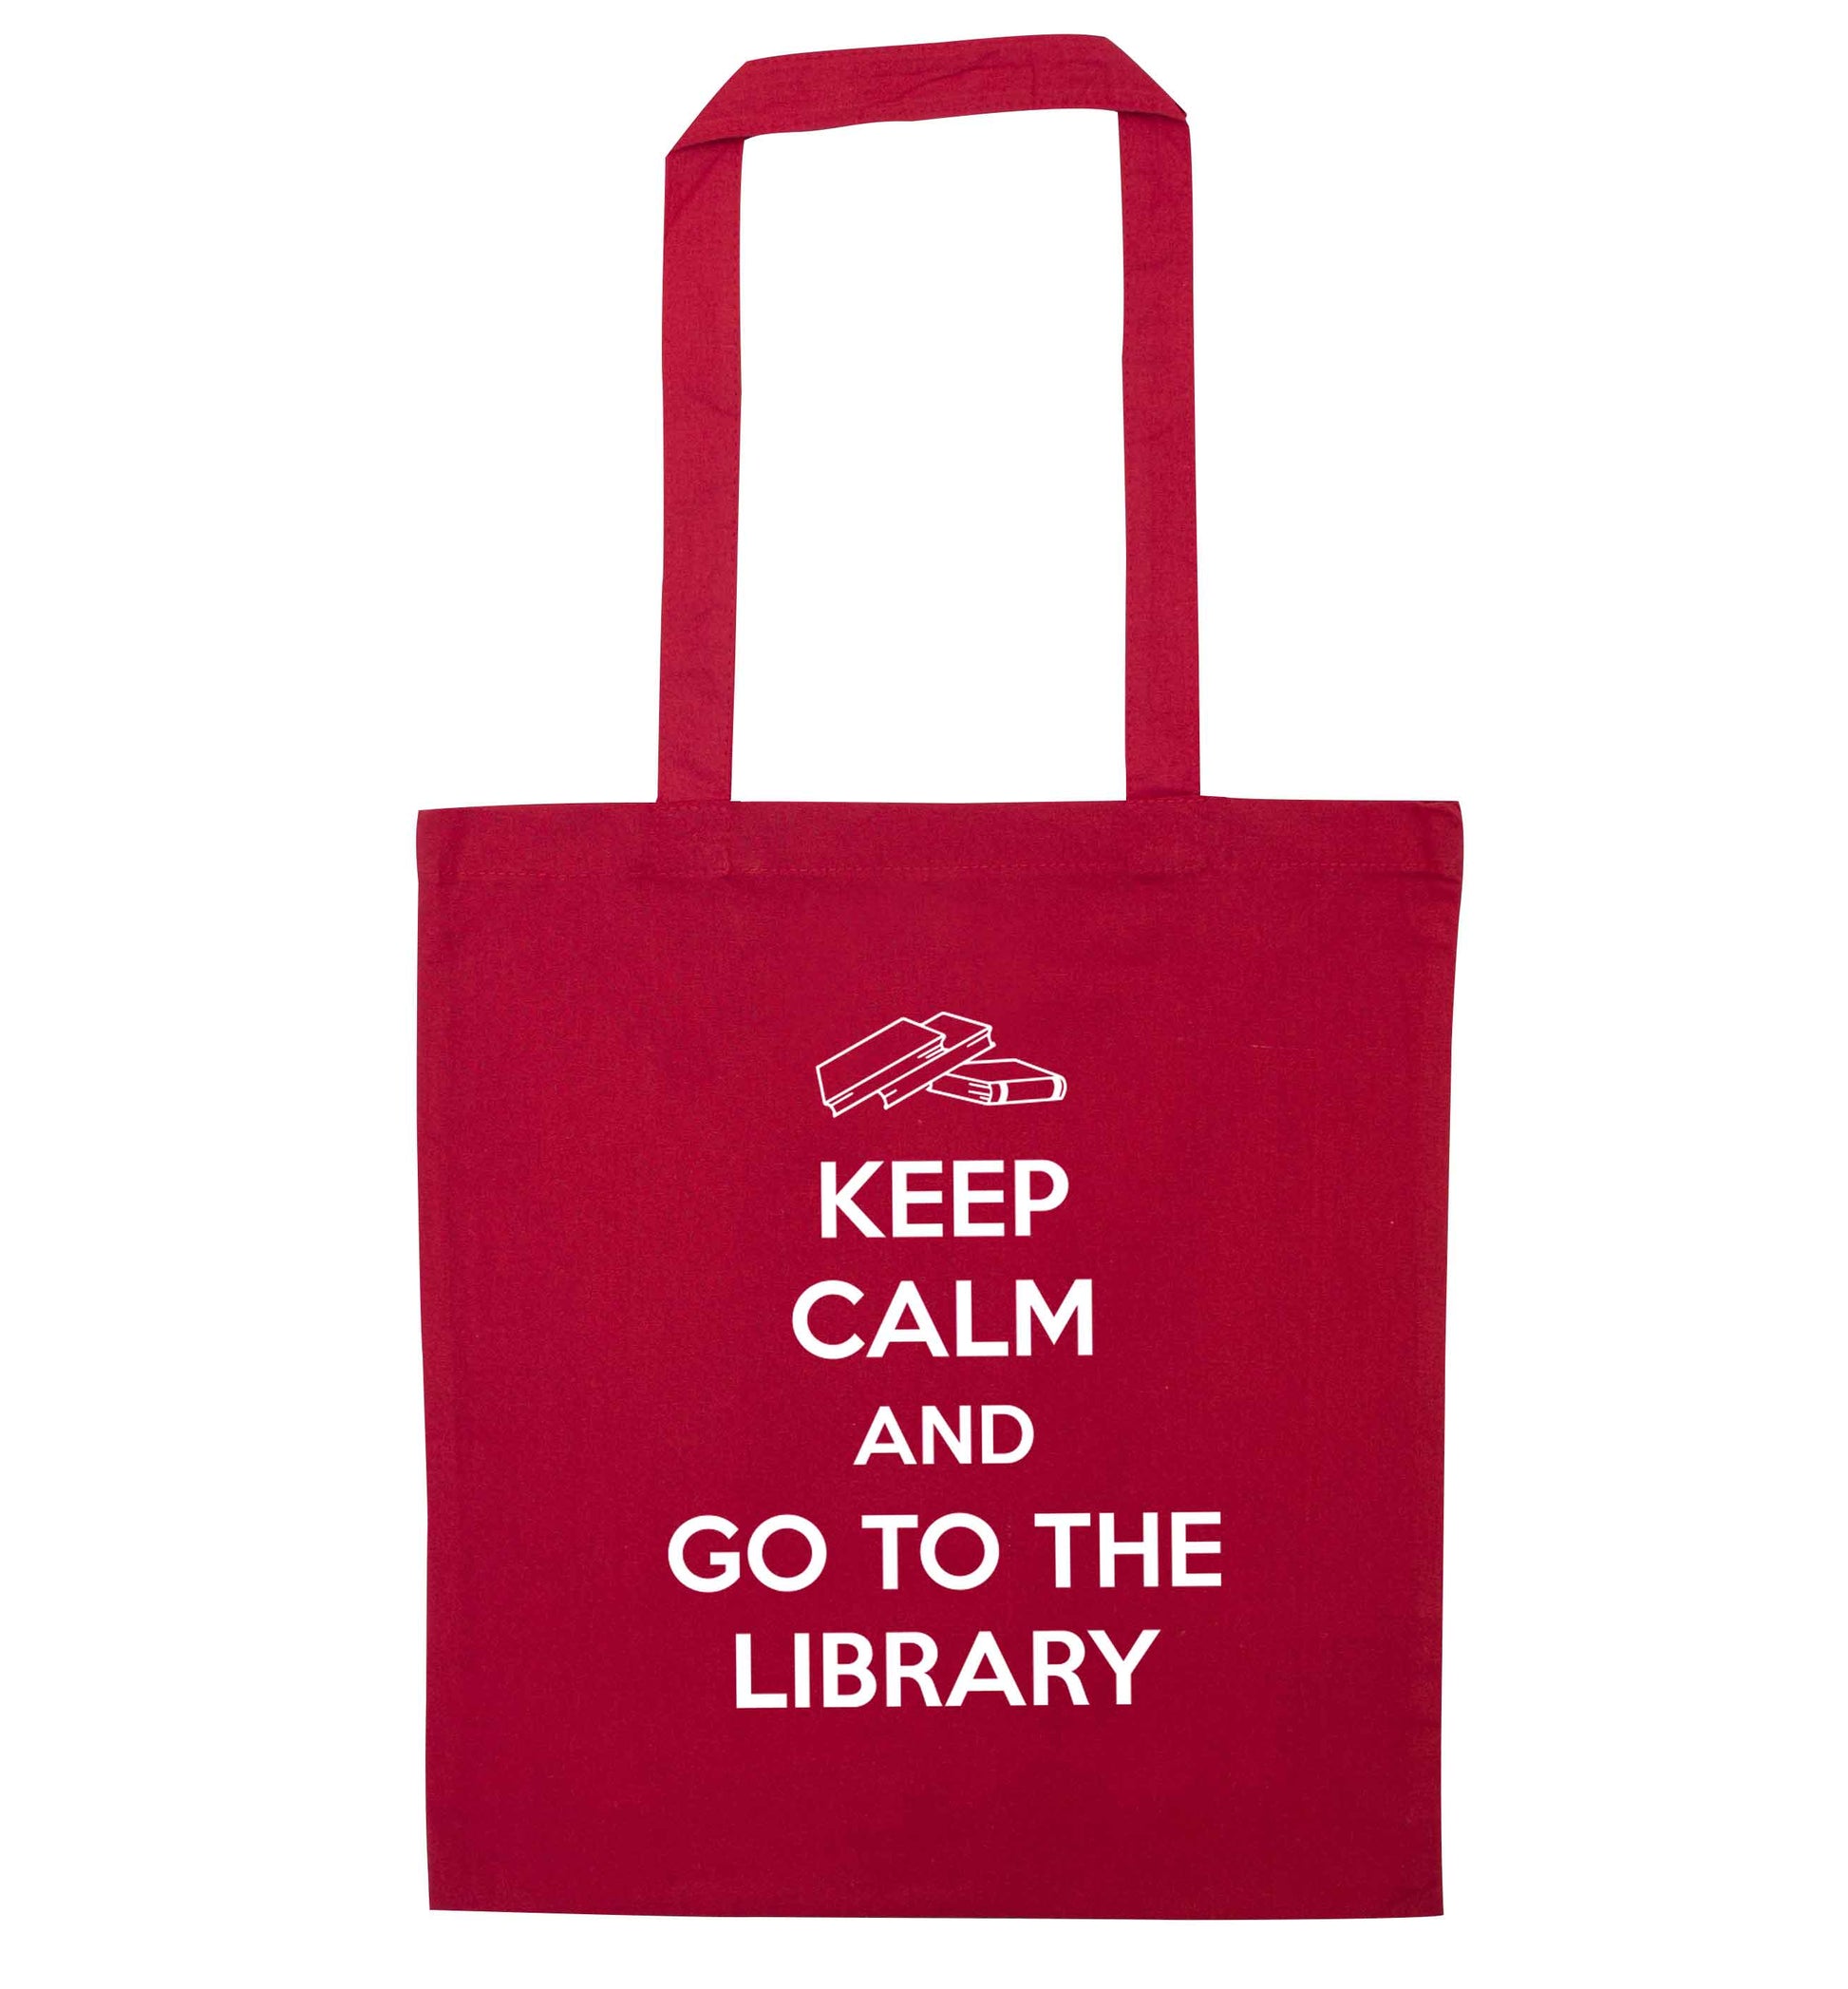 Keep calm and go to the library red tote bag